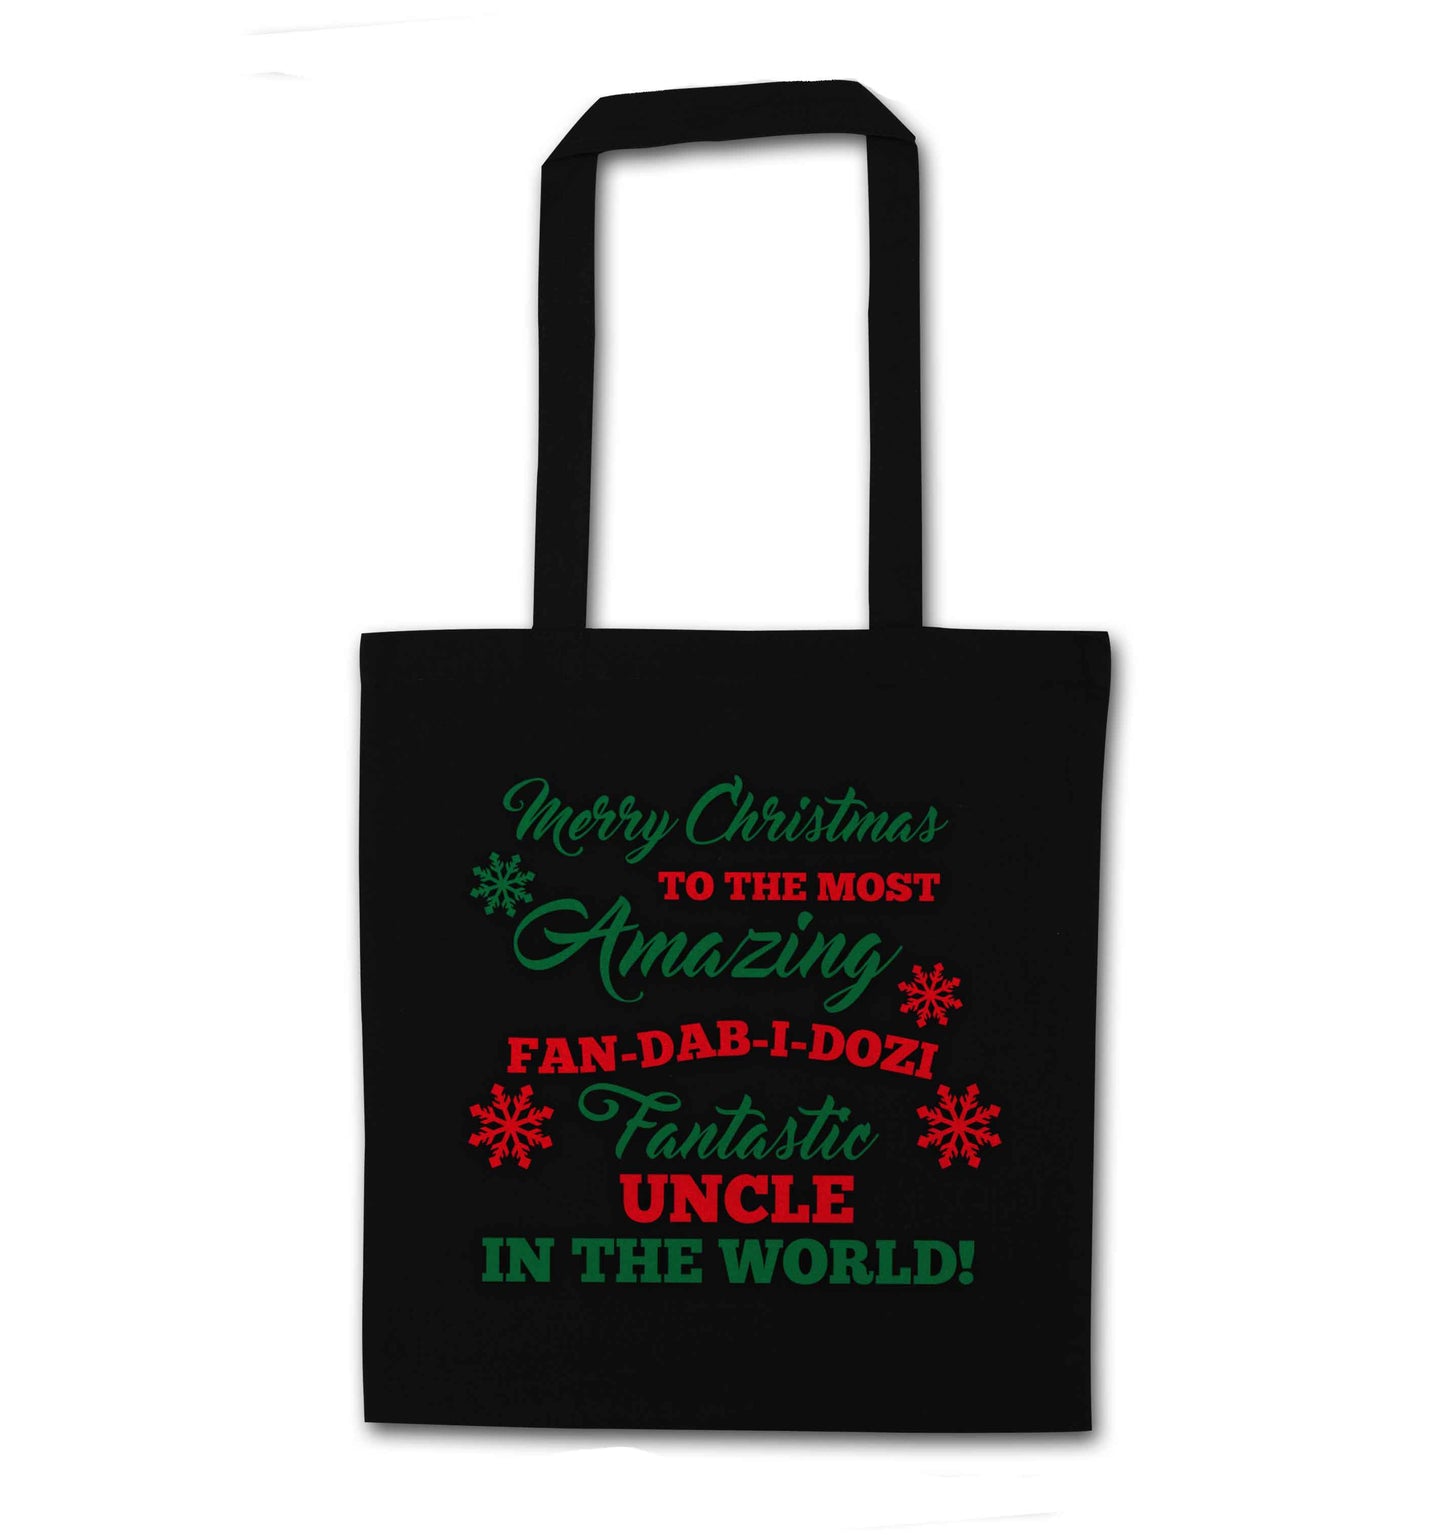 Merry Christmas to the most amazing fan-dab-i-dozi fantasic Uncle in the world black tote bag